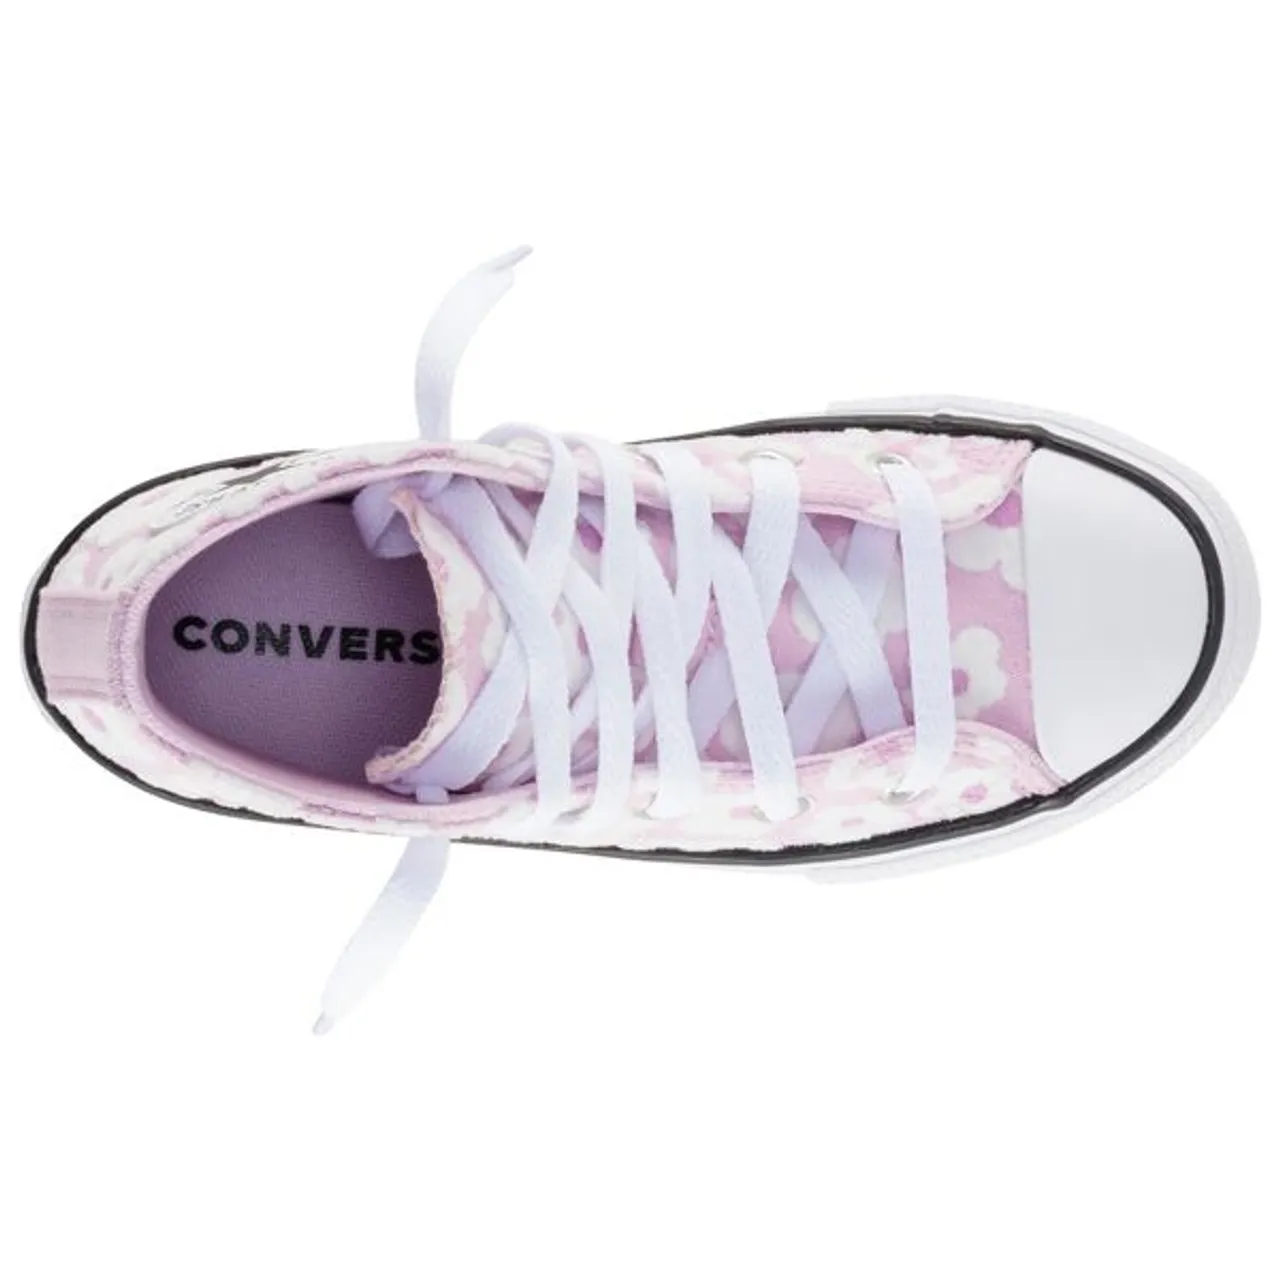 Sneaker CONVERSE "CHUCK TAYLOR ALL STAR FLORAL EMBROI" Gr. 29, lila (stardust lilac) Schuhe Sneaker